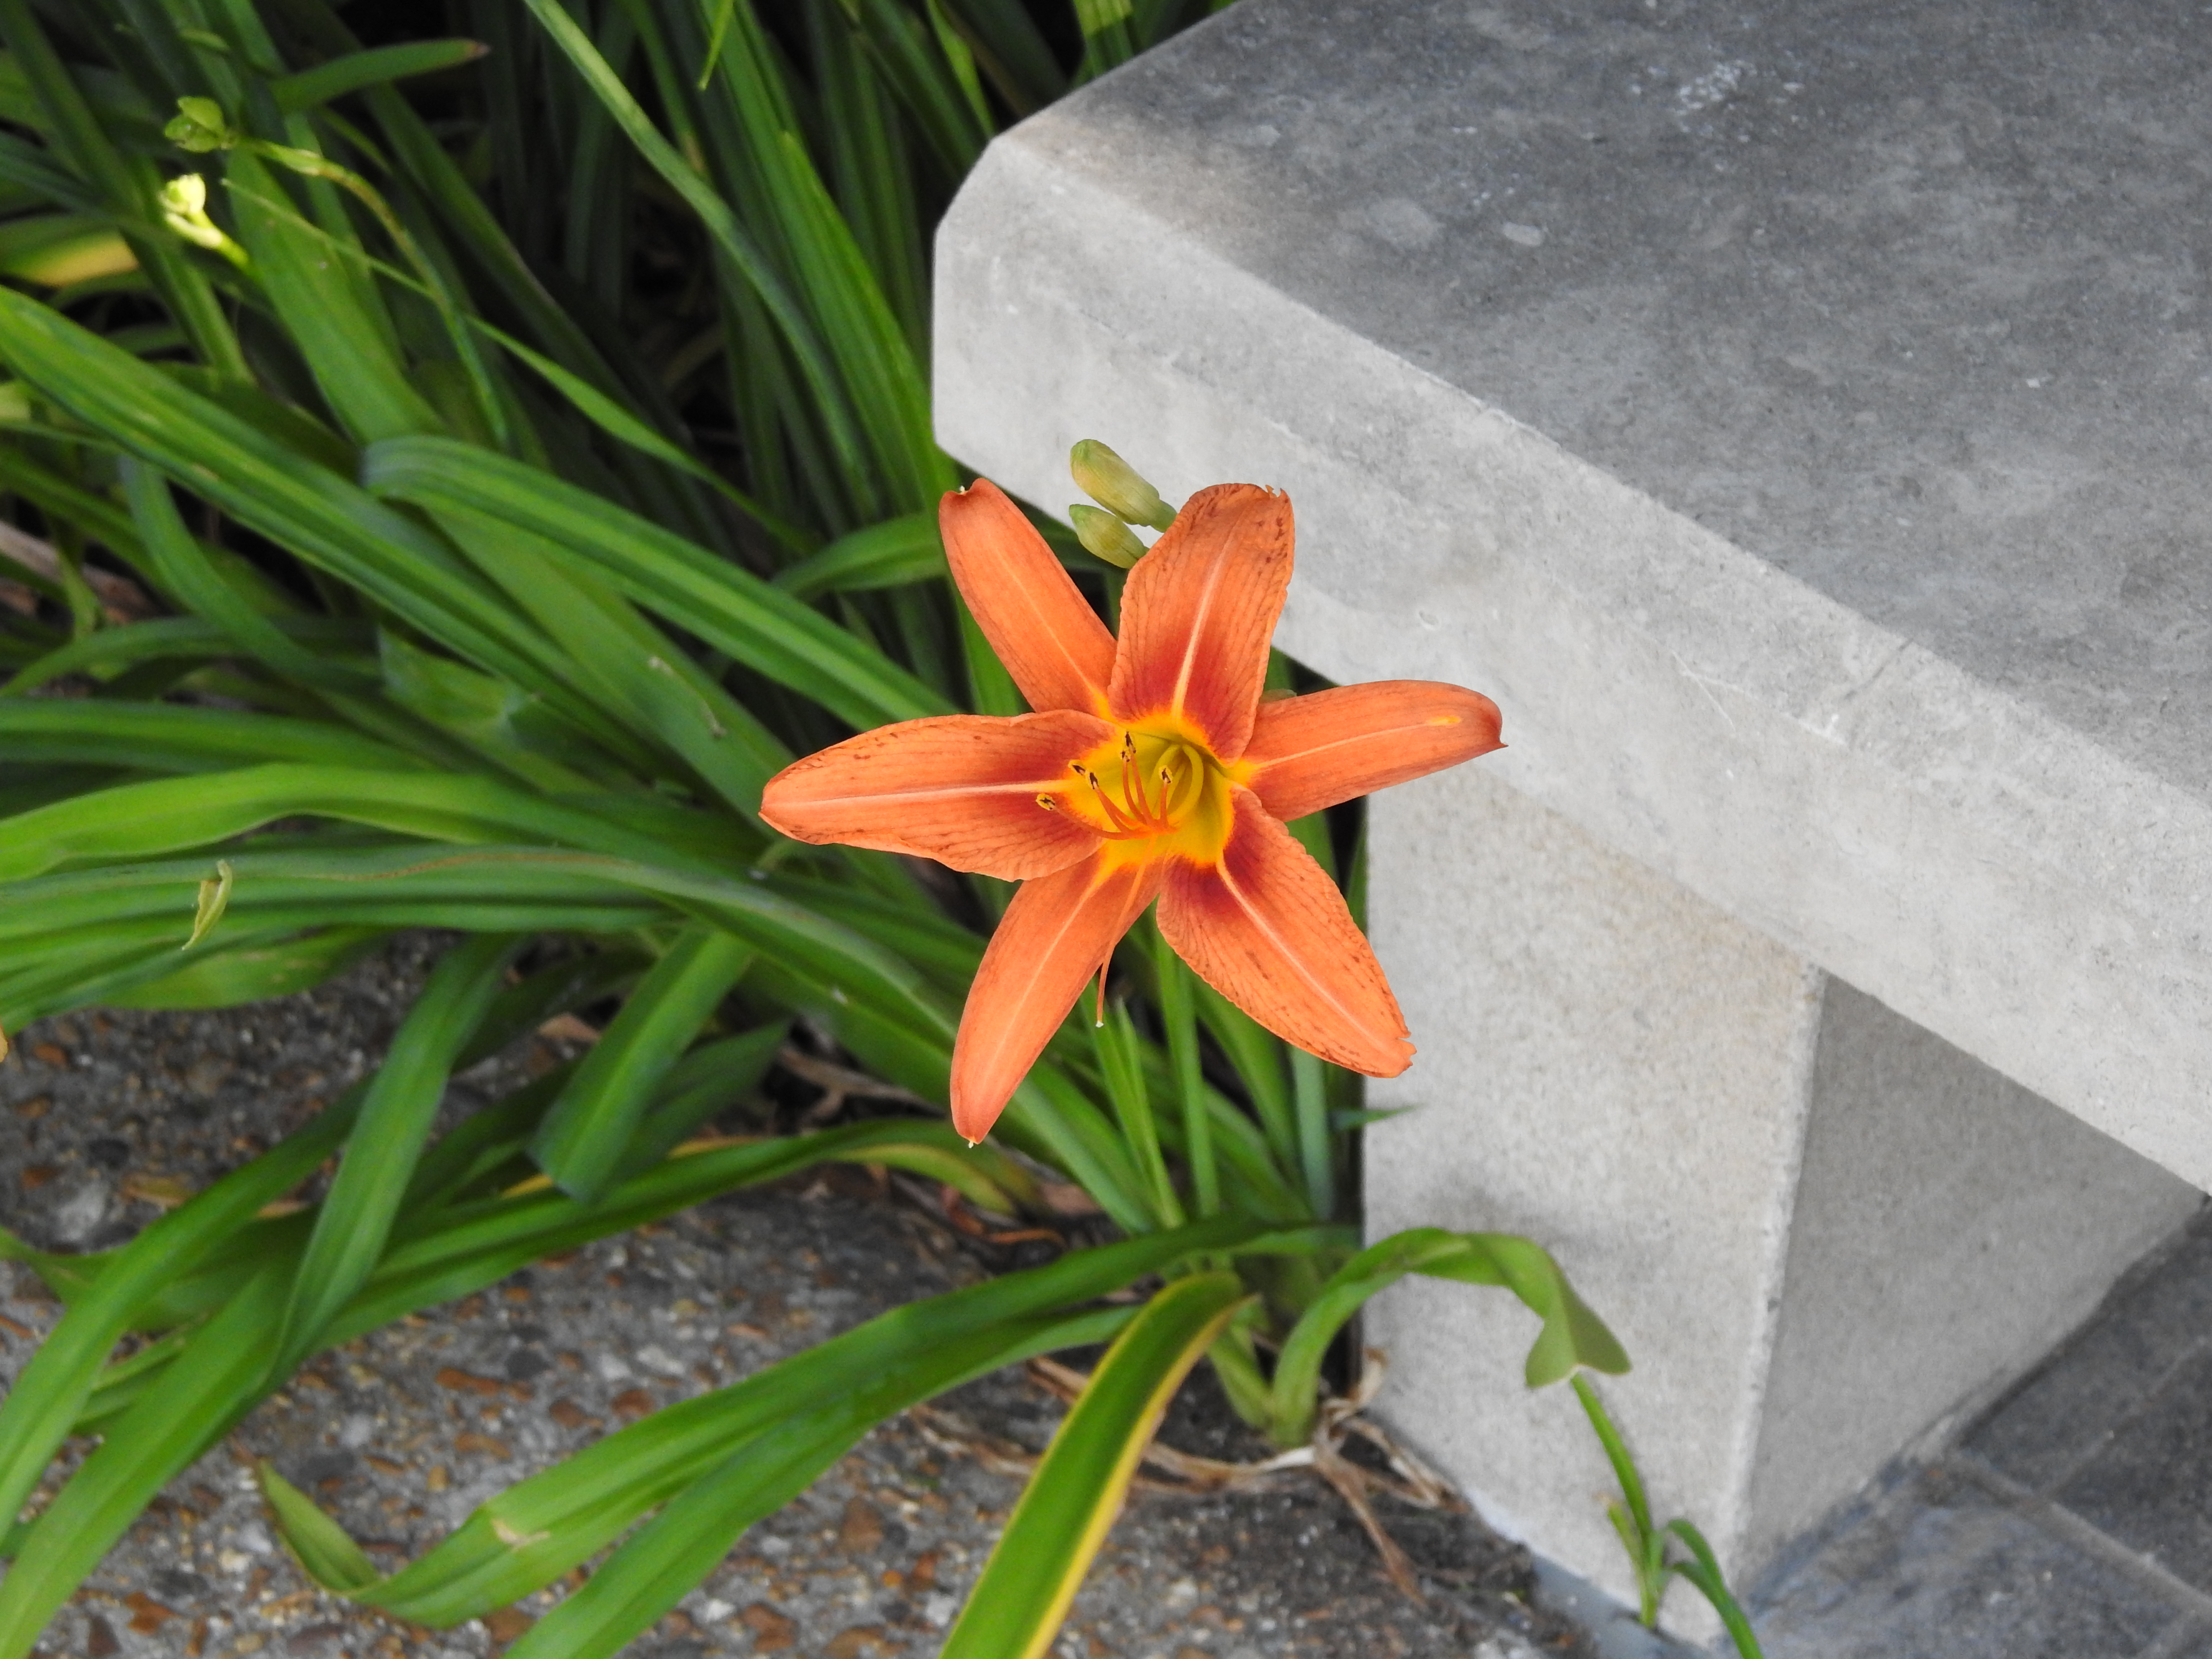 An orange lily with a concrete bench in the background